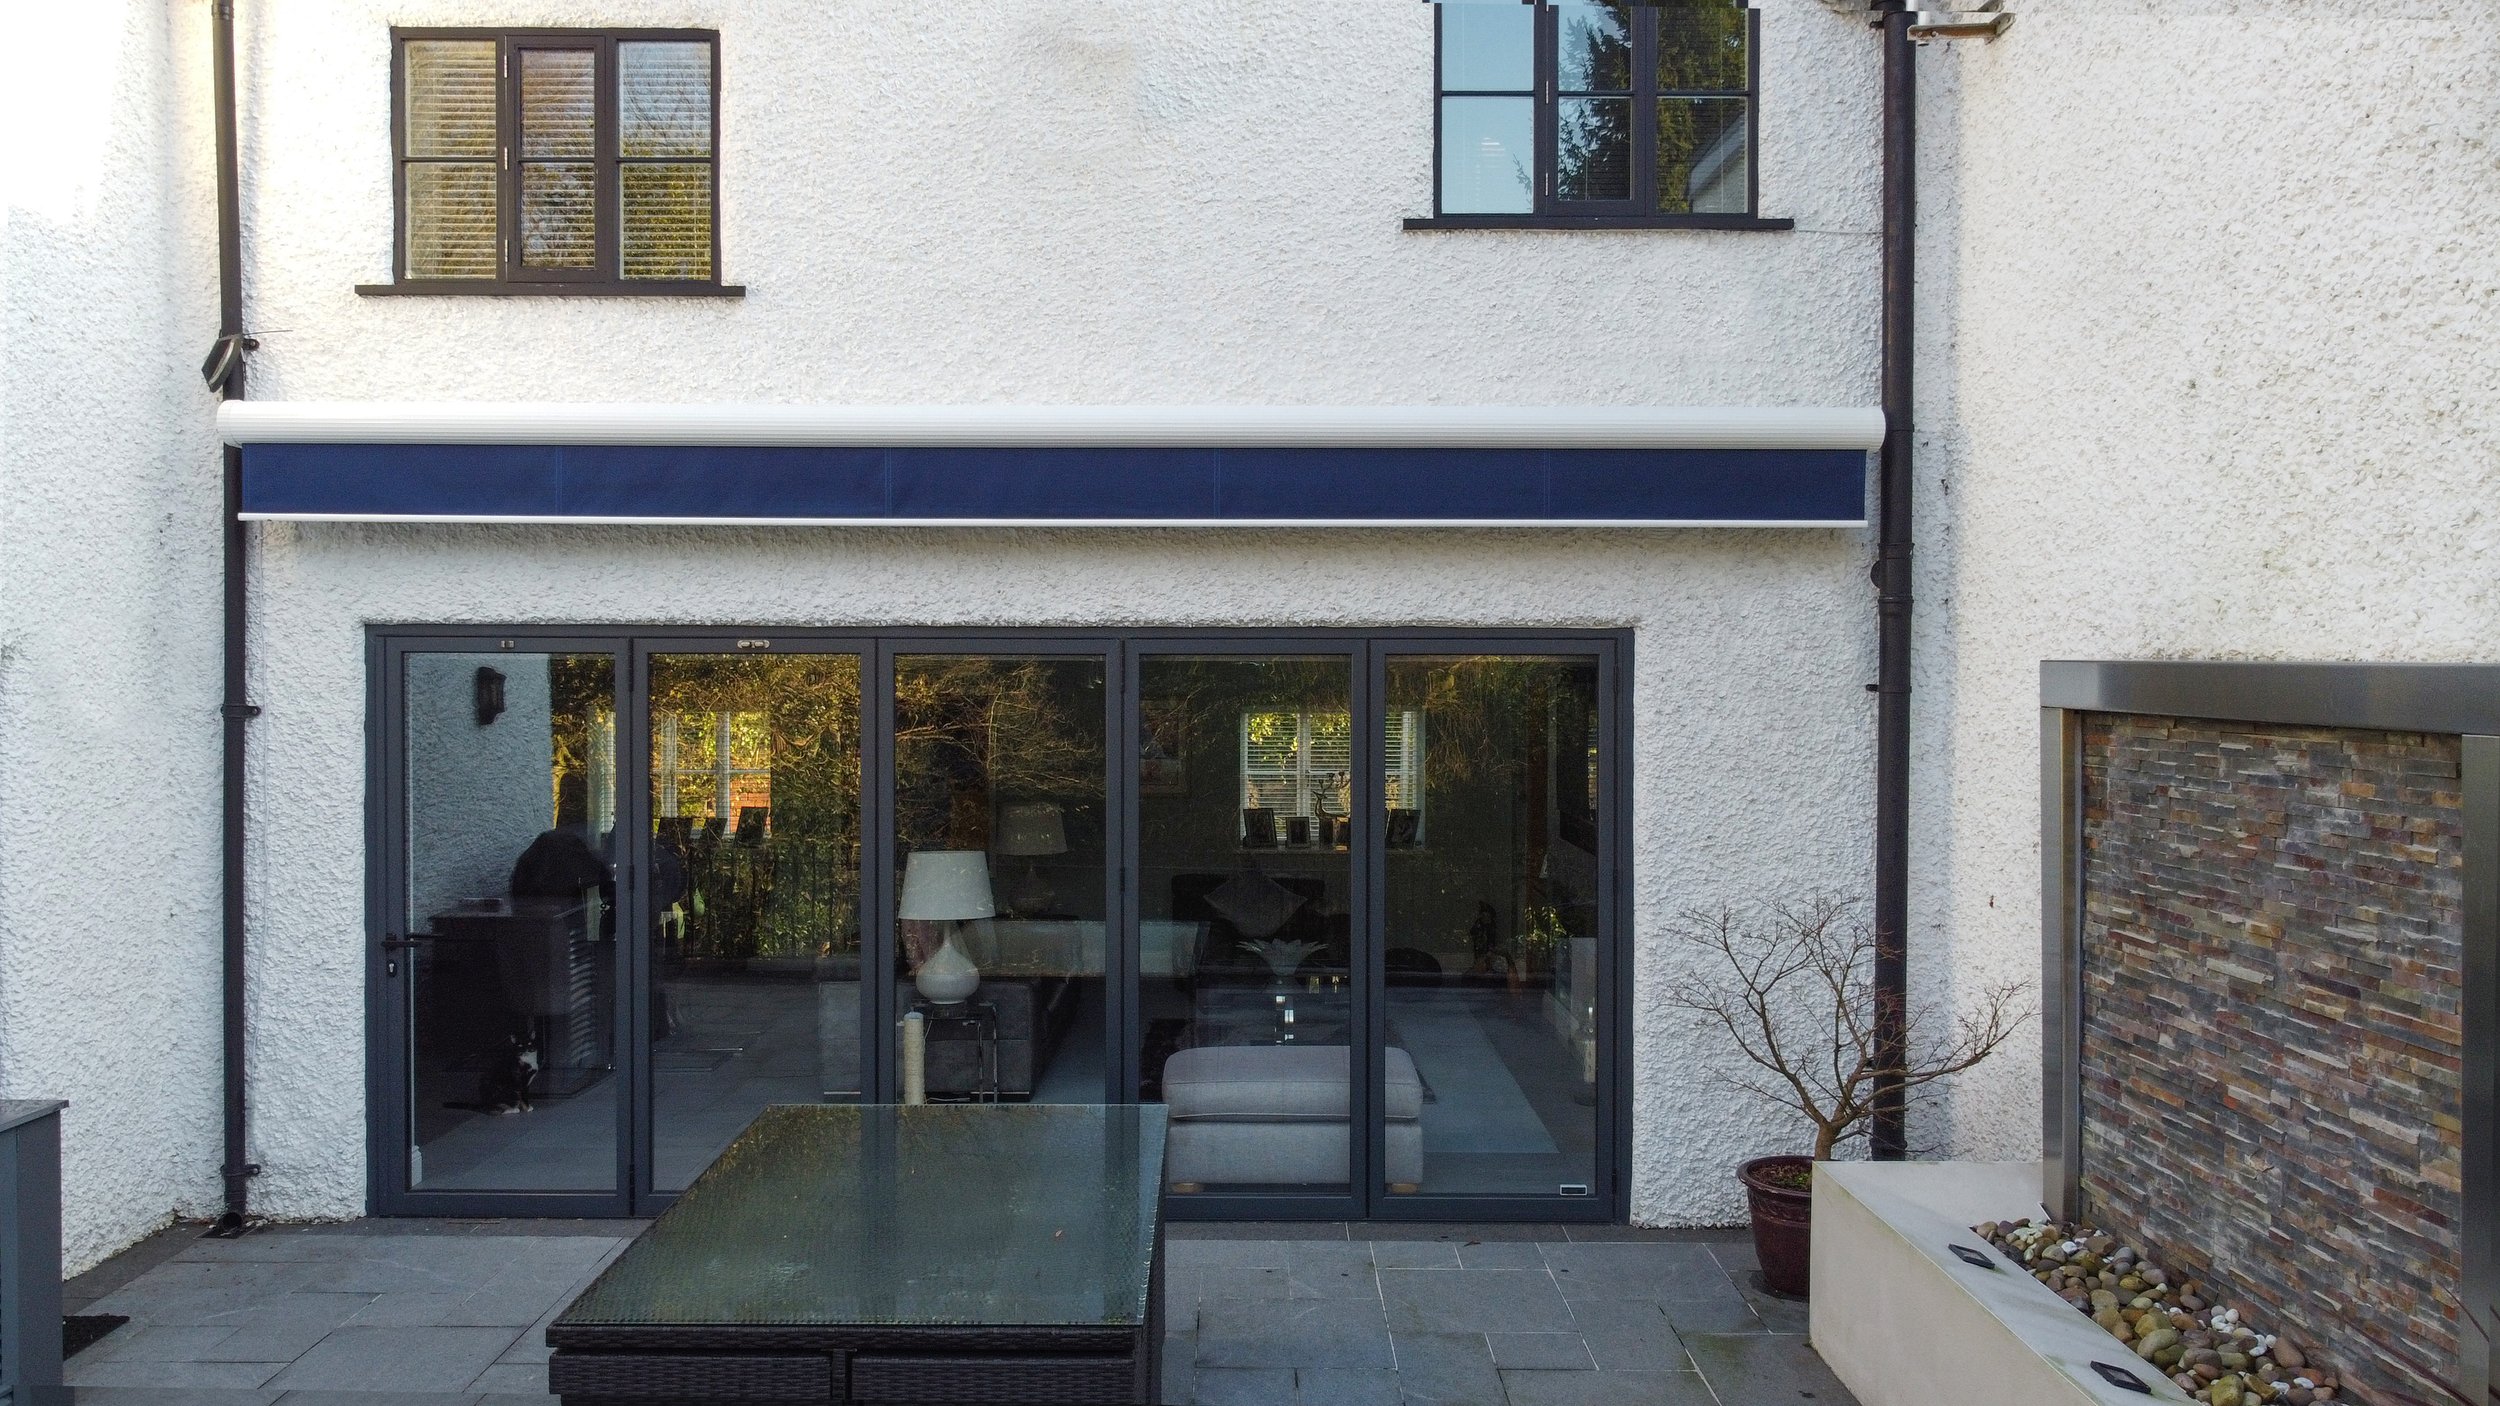 WORSLEY PROJECT, GREATER MANCHESTER | Pars Plus Cassette Awning